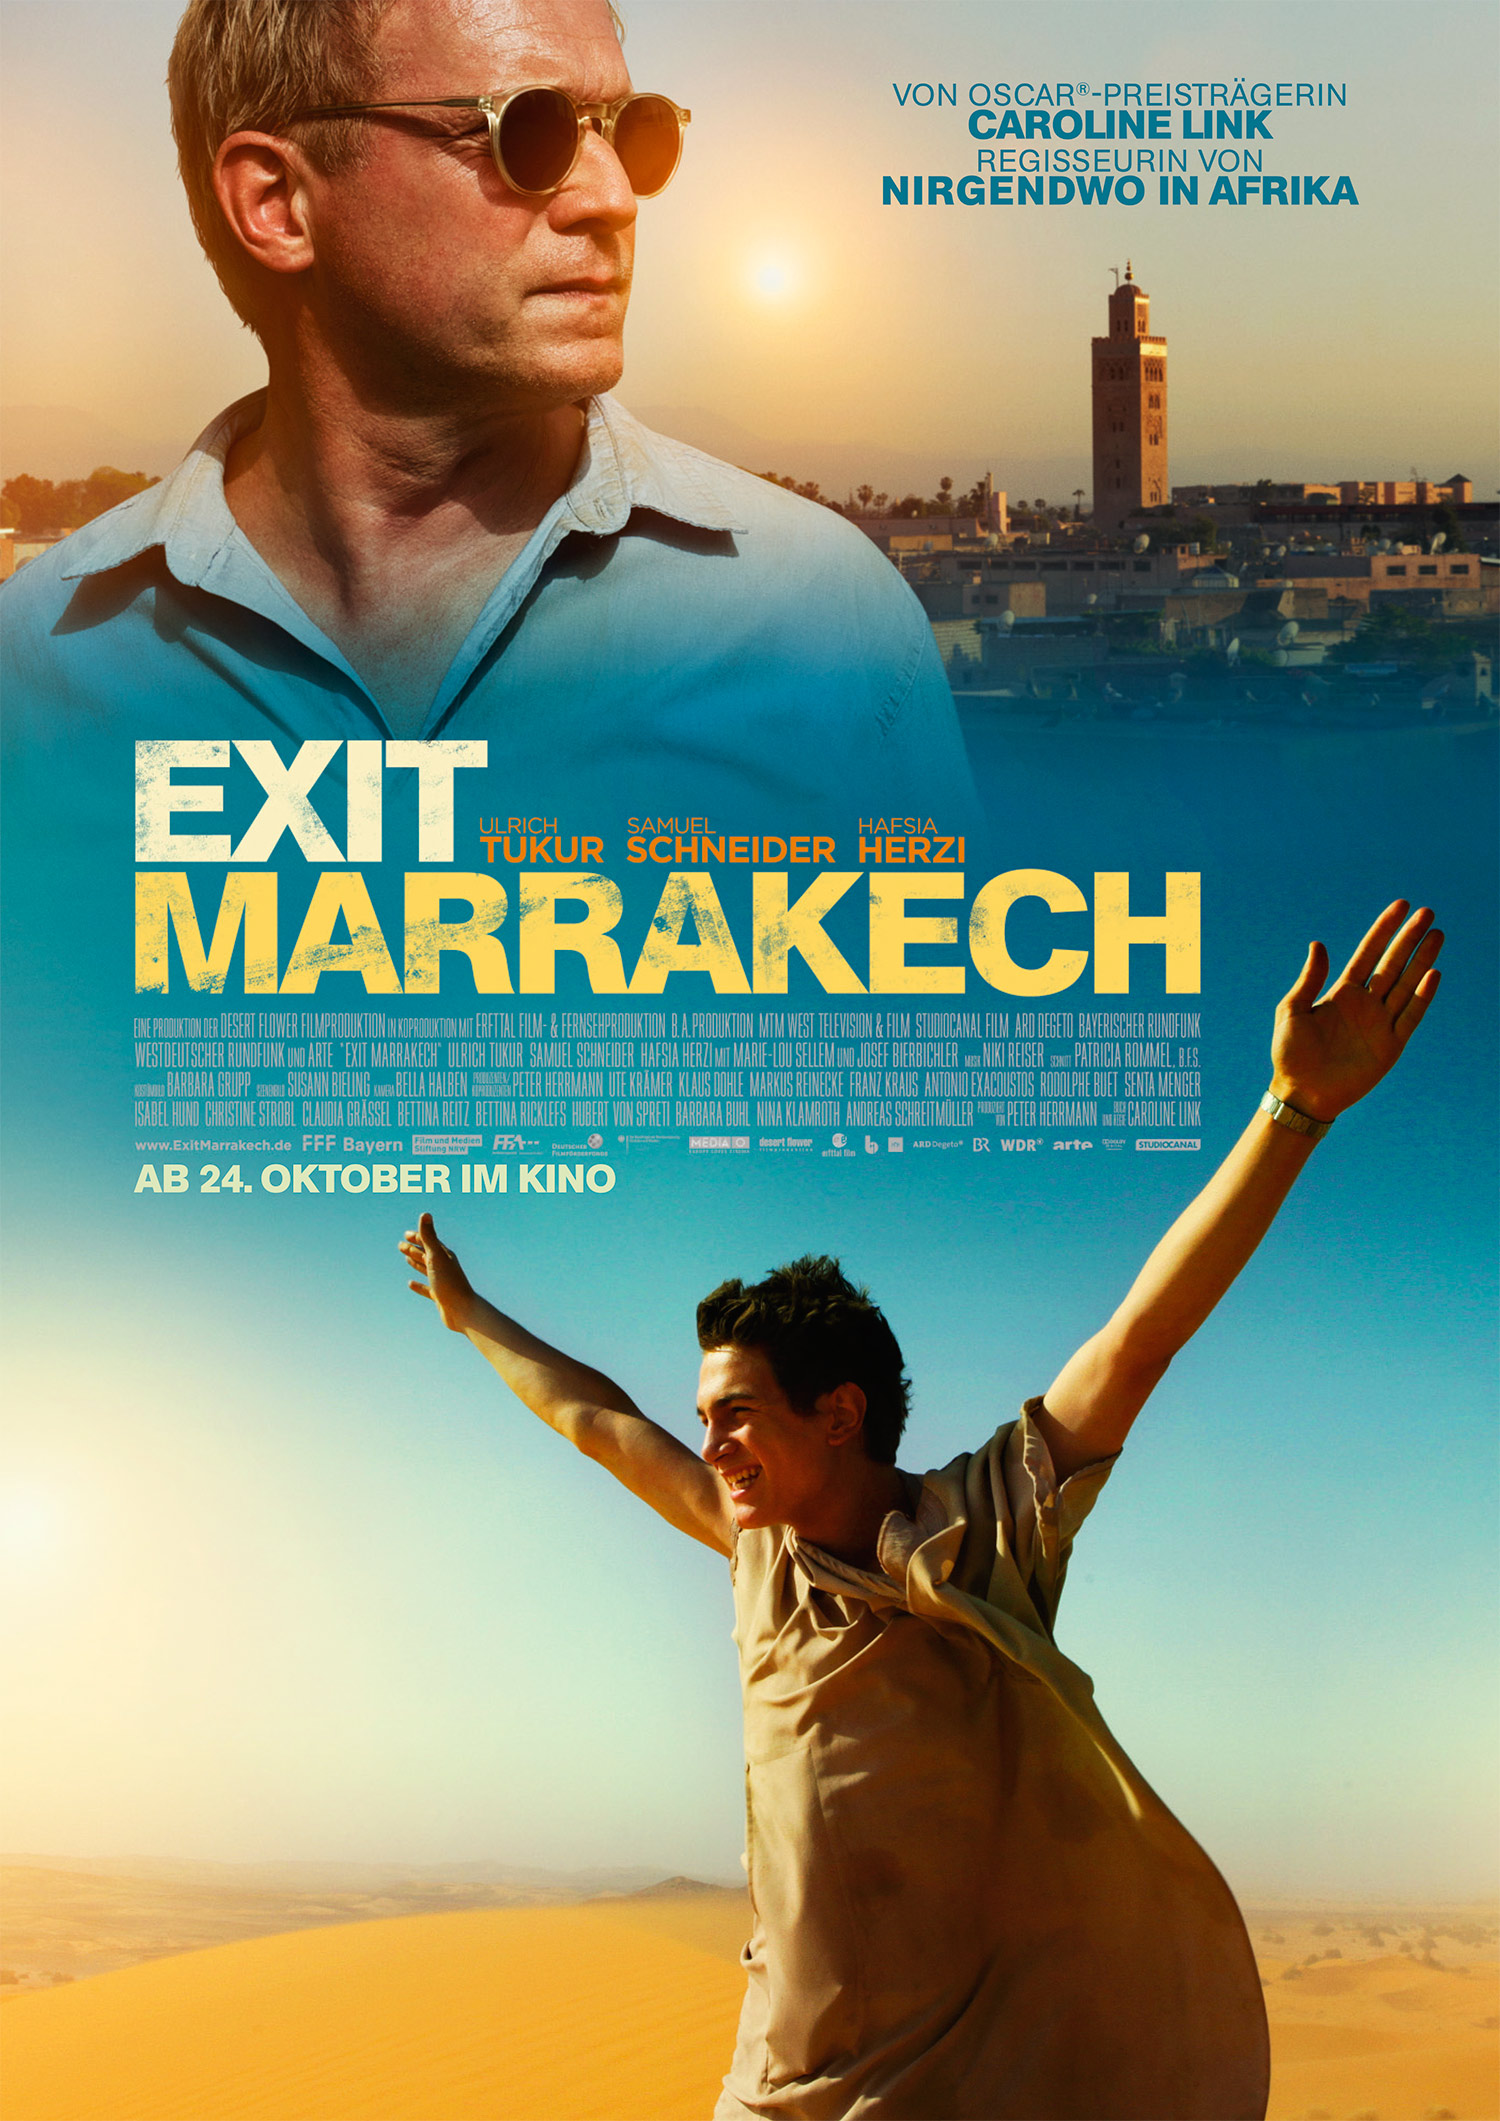 Studiocanal<a href="/exit-marrakech">→</a><strong>Adaption</strong>